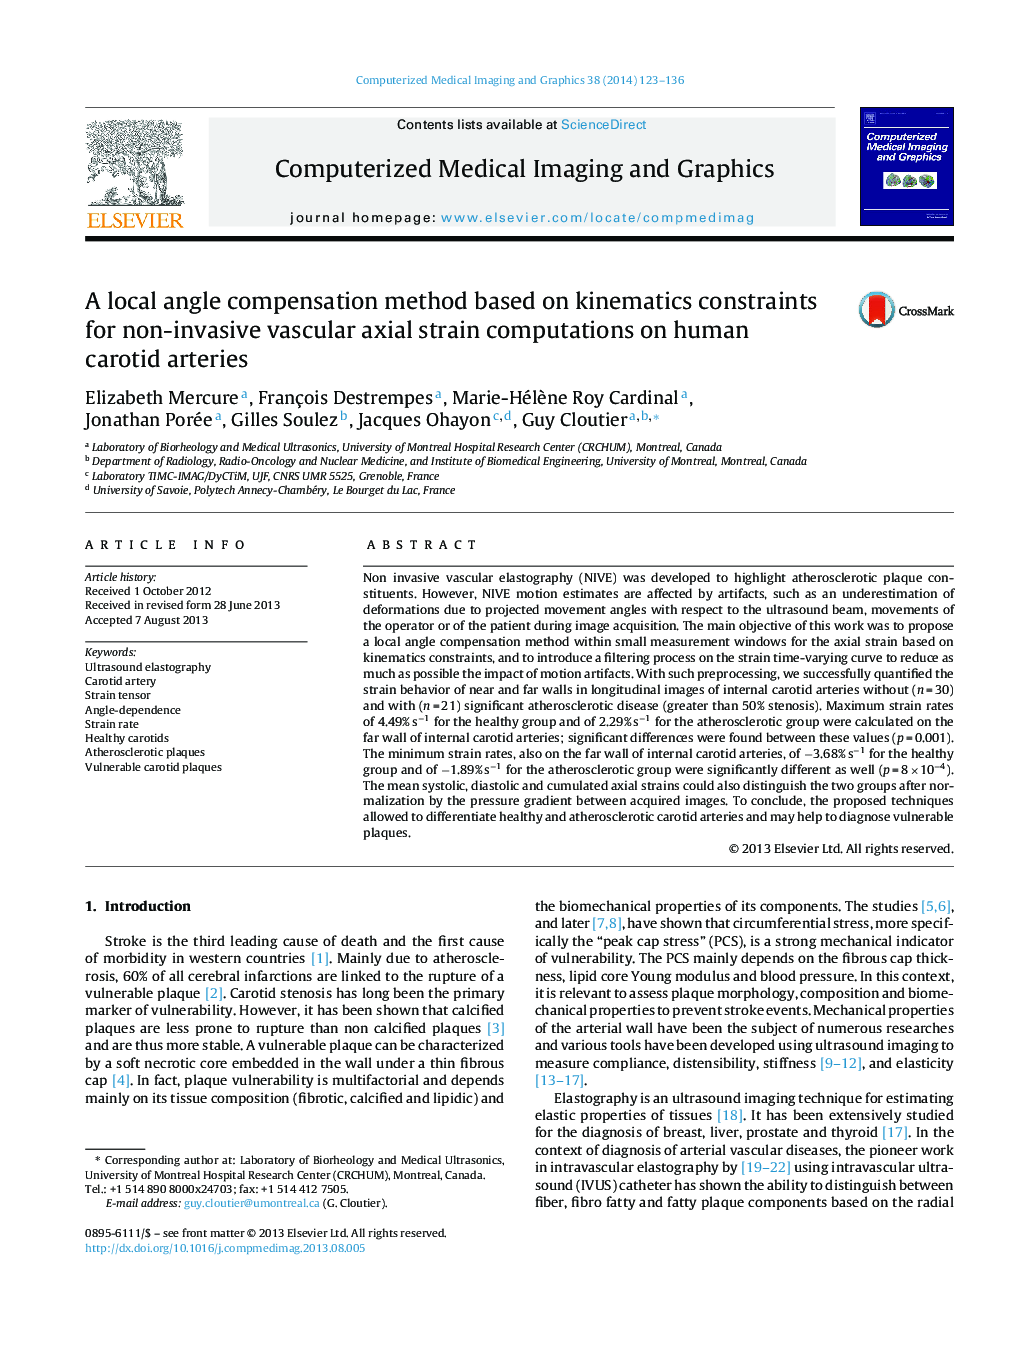 A local angle compensation method based on kinematics constraints for non-invasive vascular axial strain computations on human carotid arteries